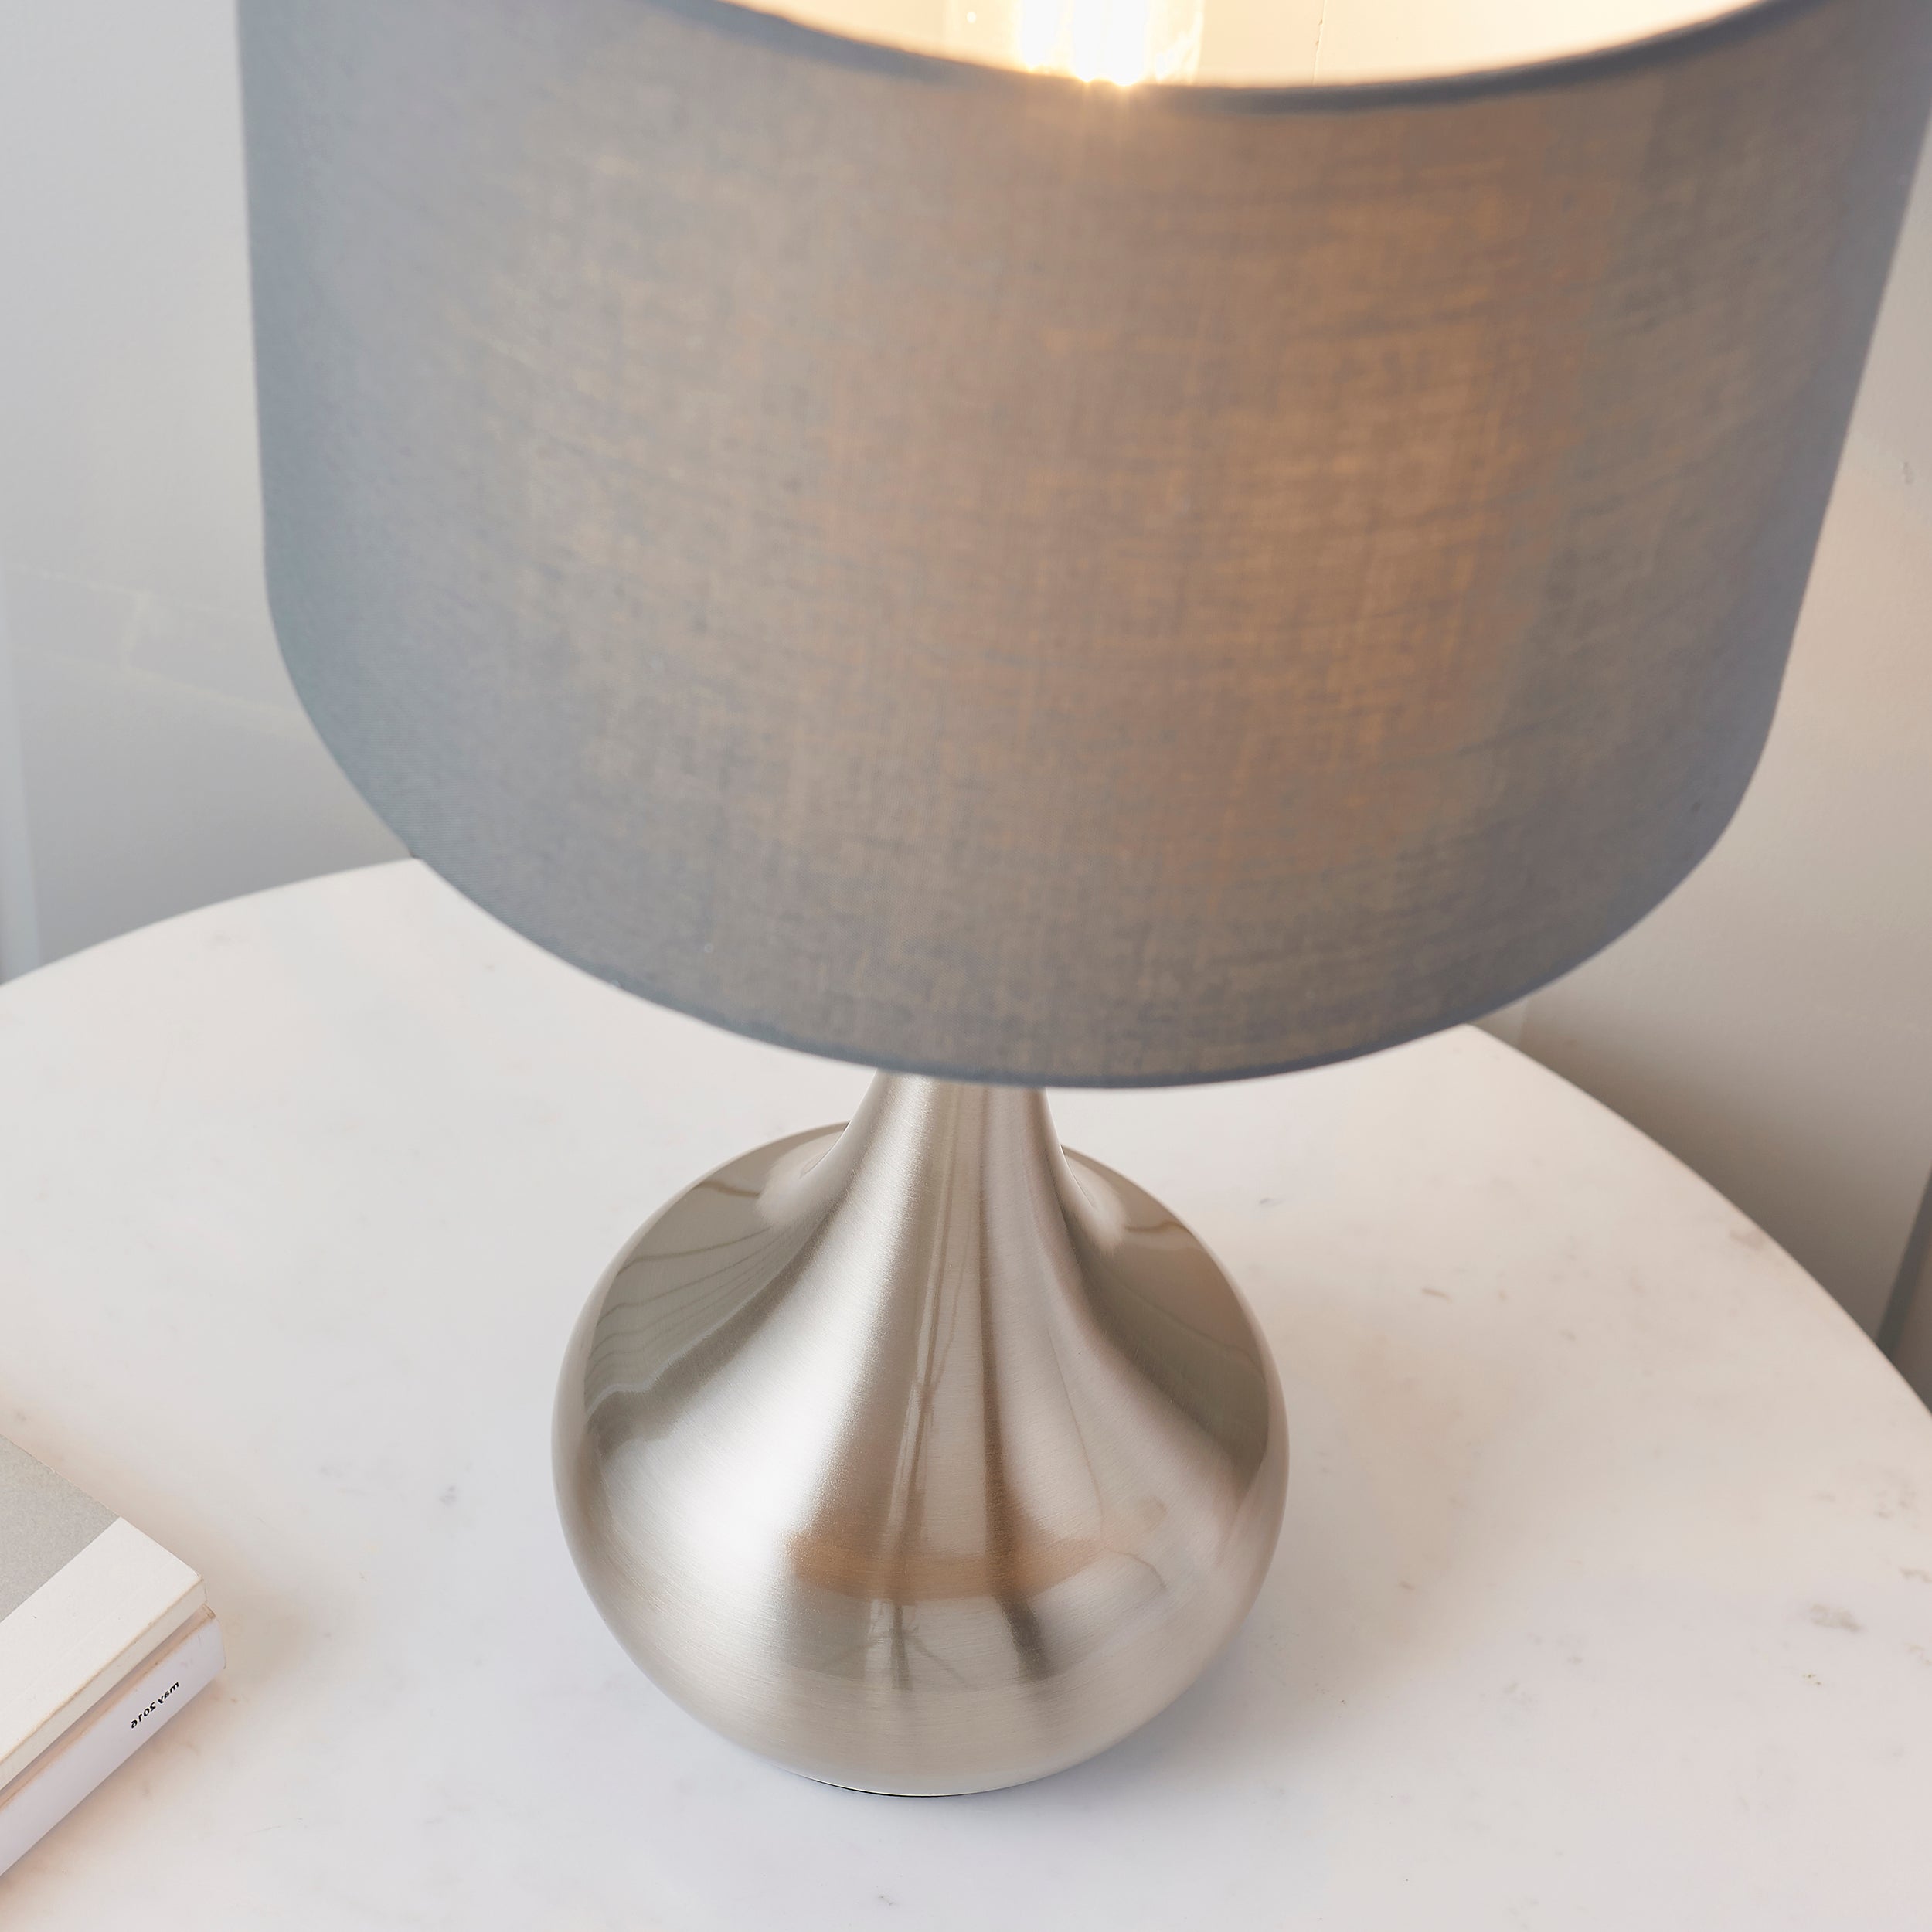 Piccadilly Table Lamp - Nickel - Pavilion Interiors